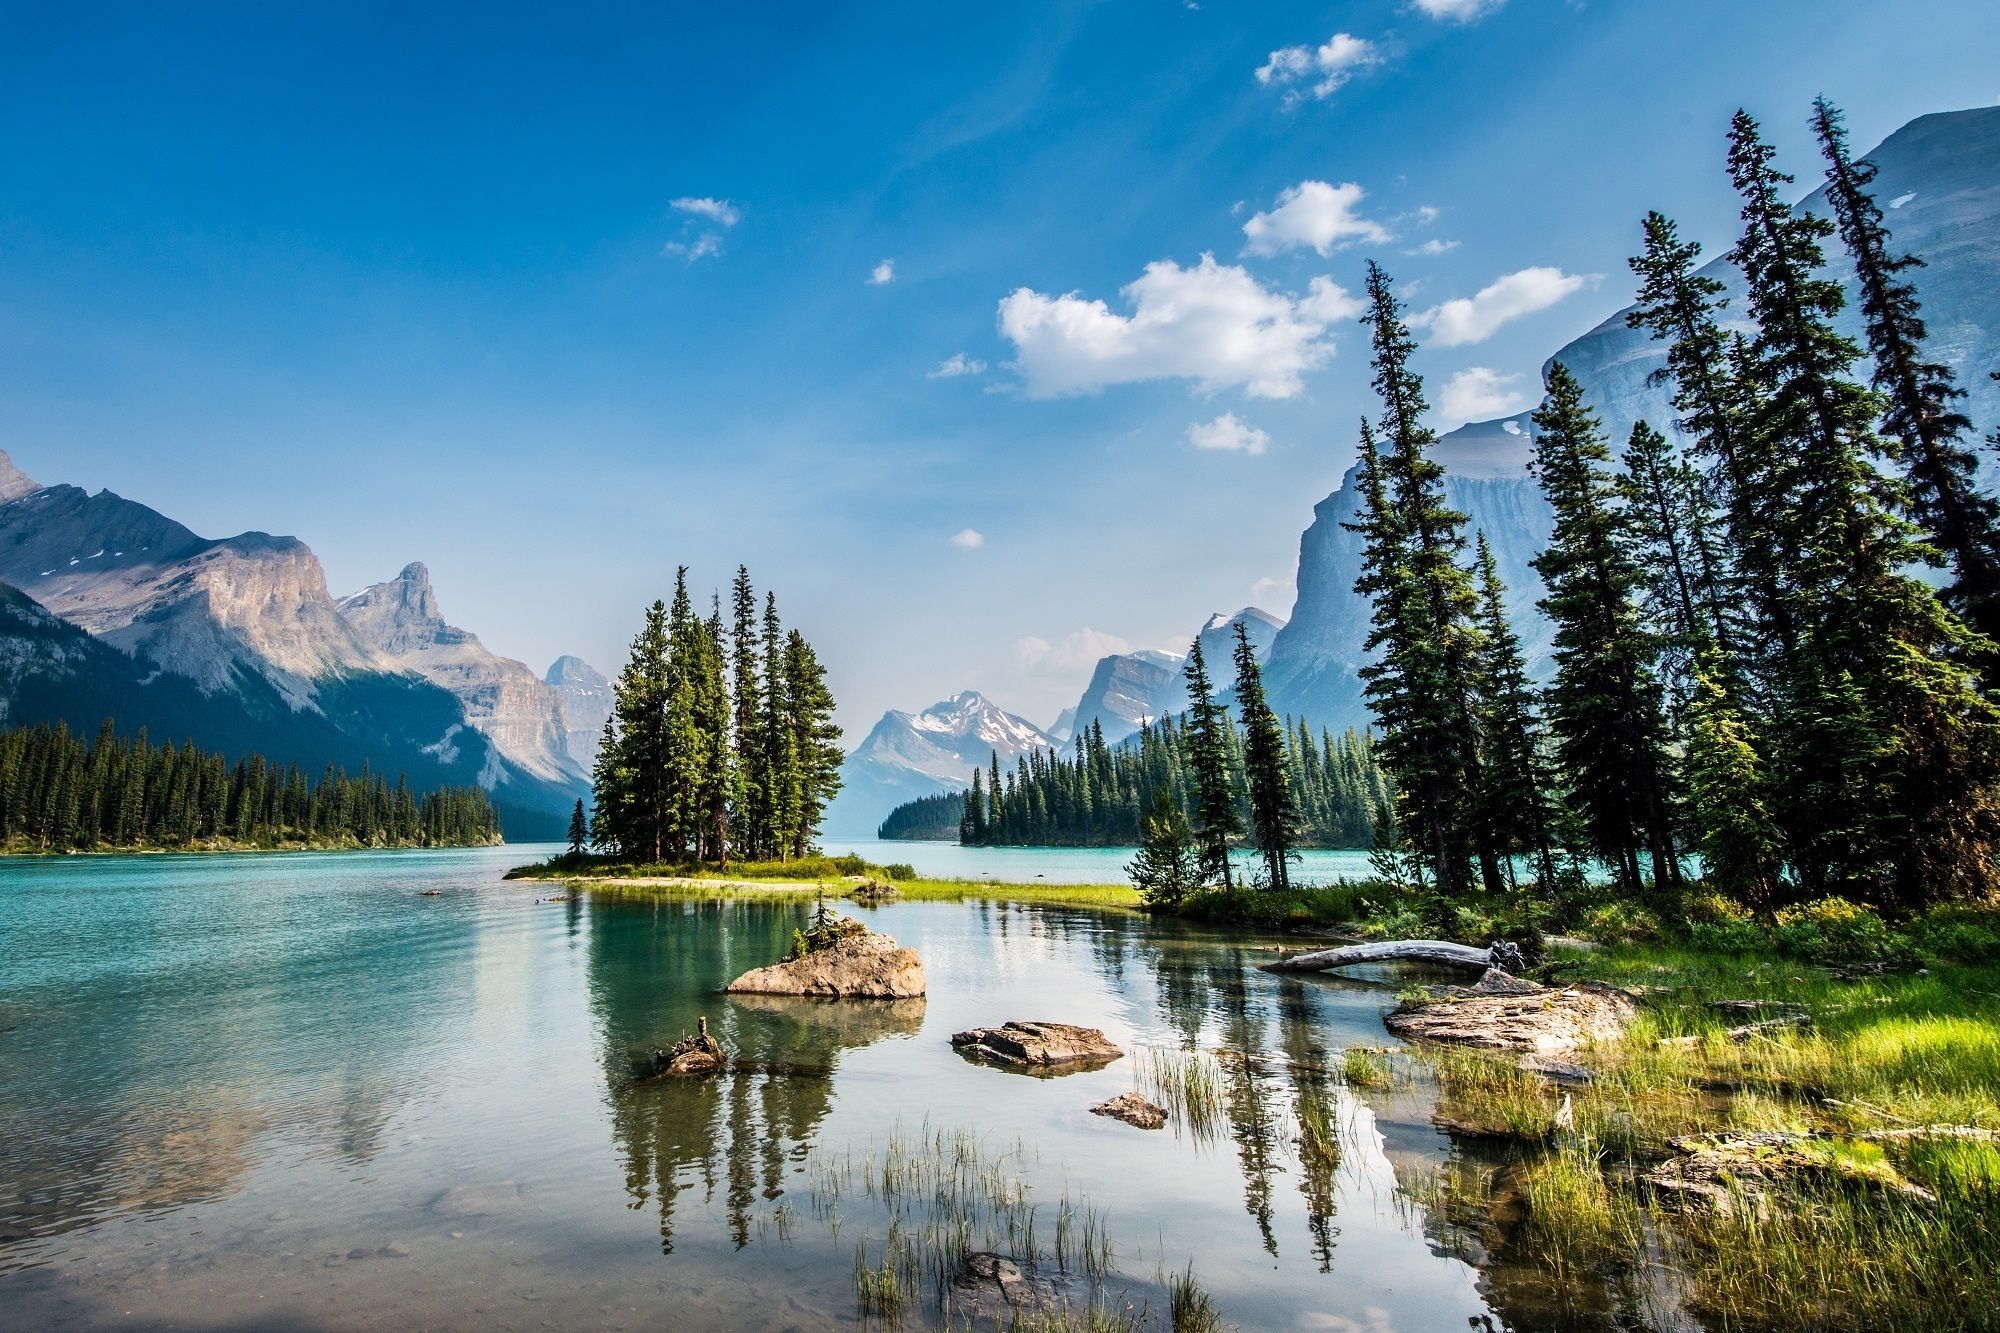 10 TOP Things to Do in Jasper National Park (2020 Activity Guide) | Expedia